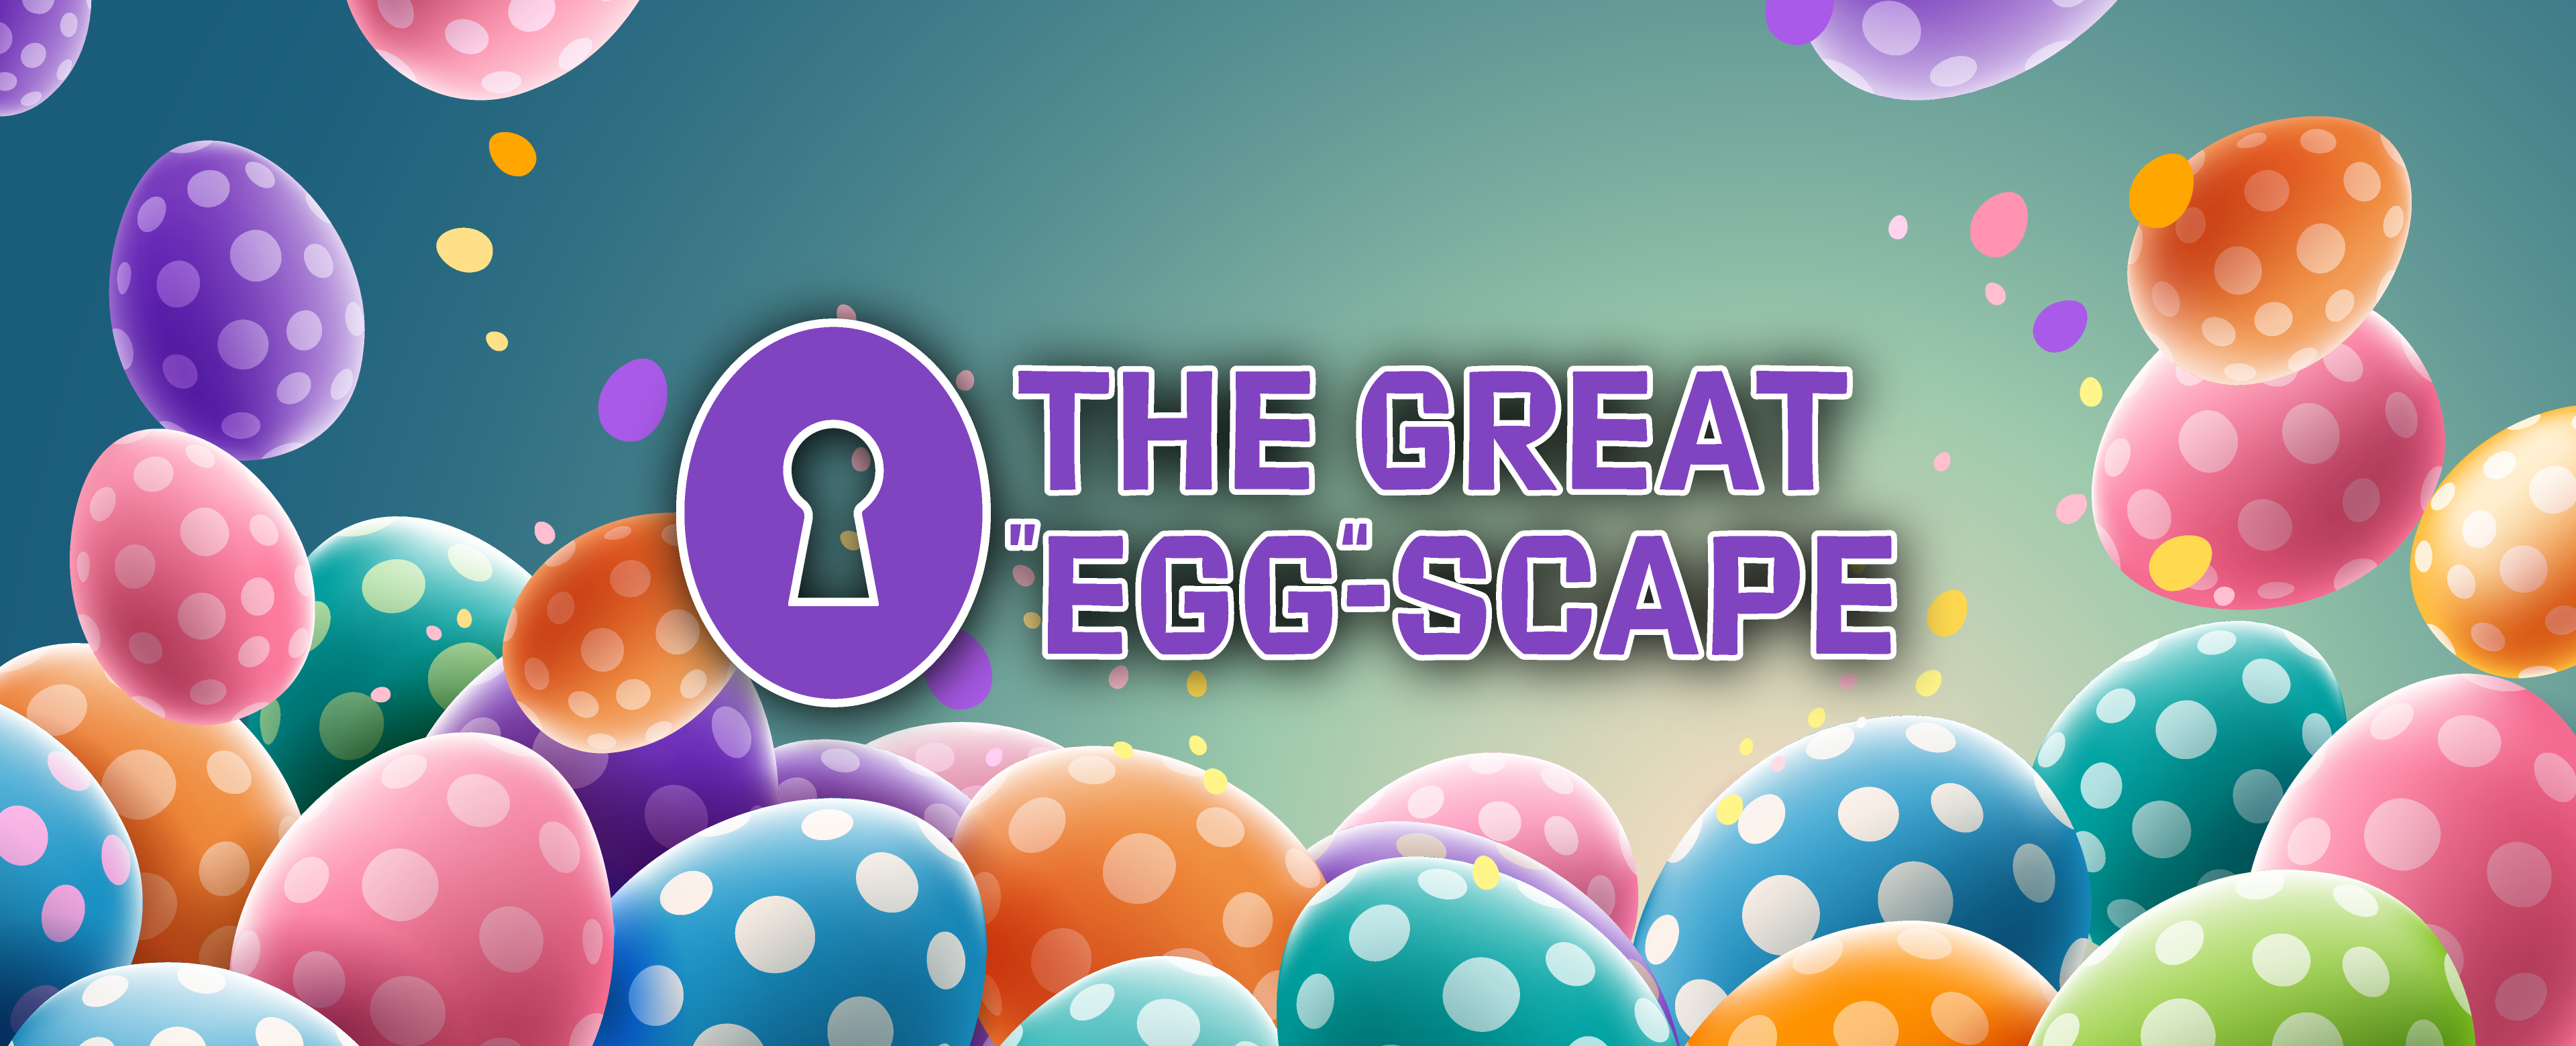 The Great "Egg"scape